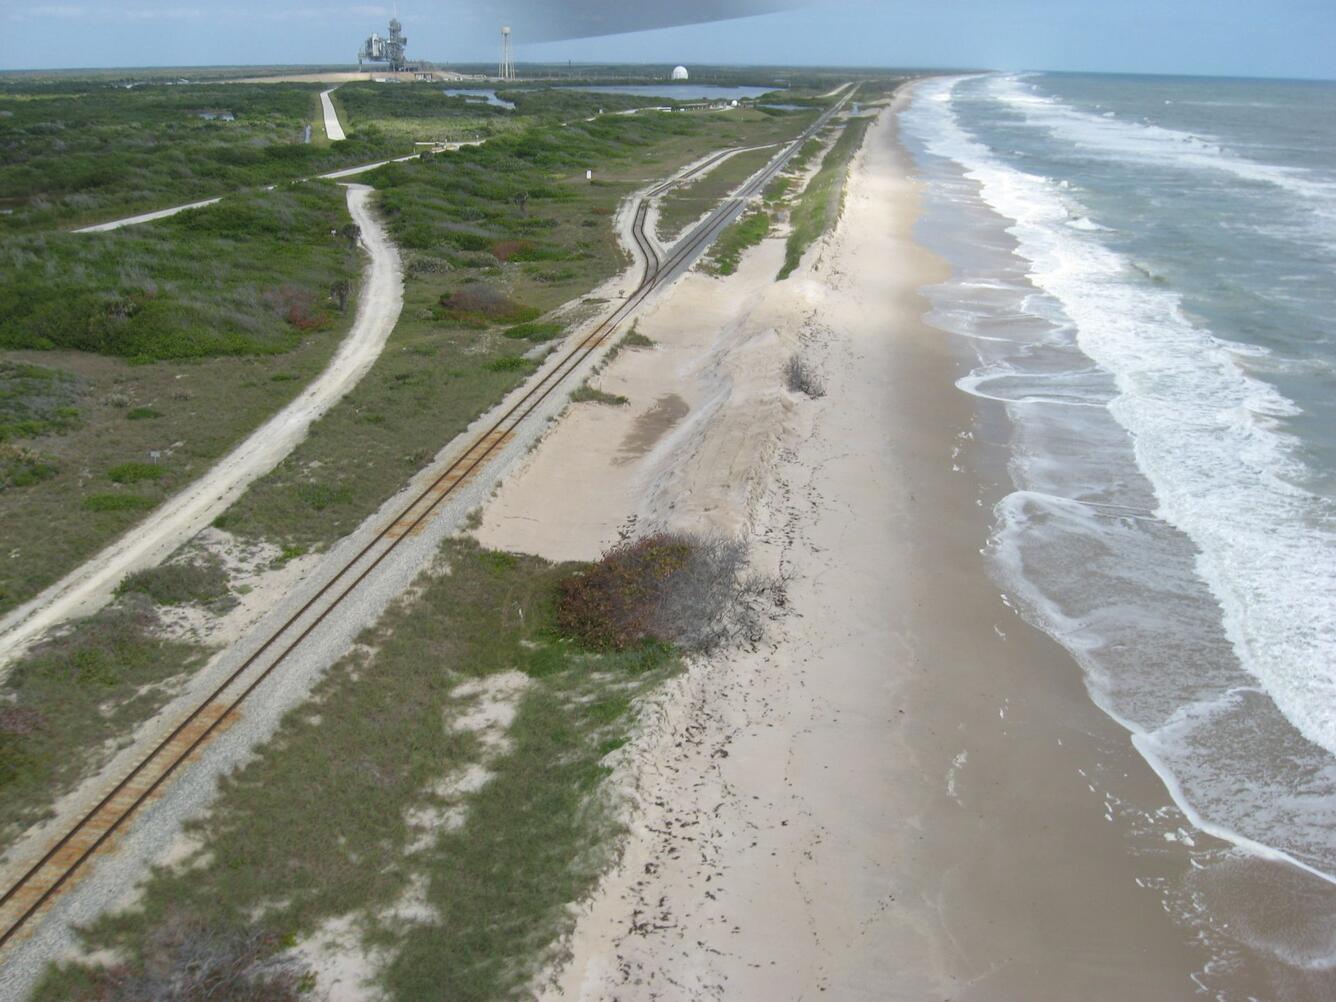 Low dunes near Cape Canaveral launch pads 39A and 39B often overwash during storm events